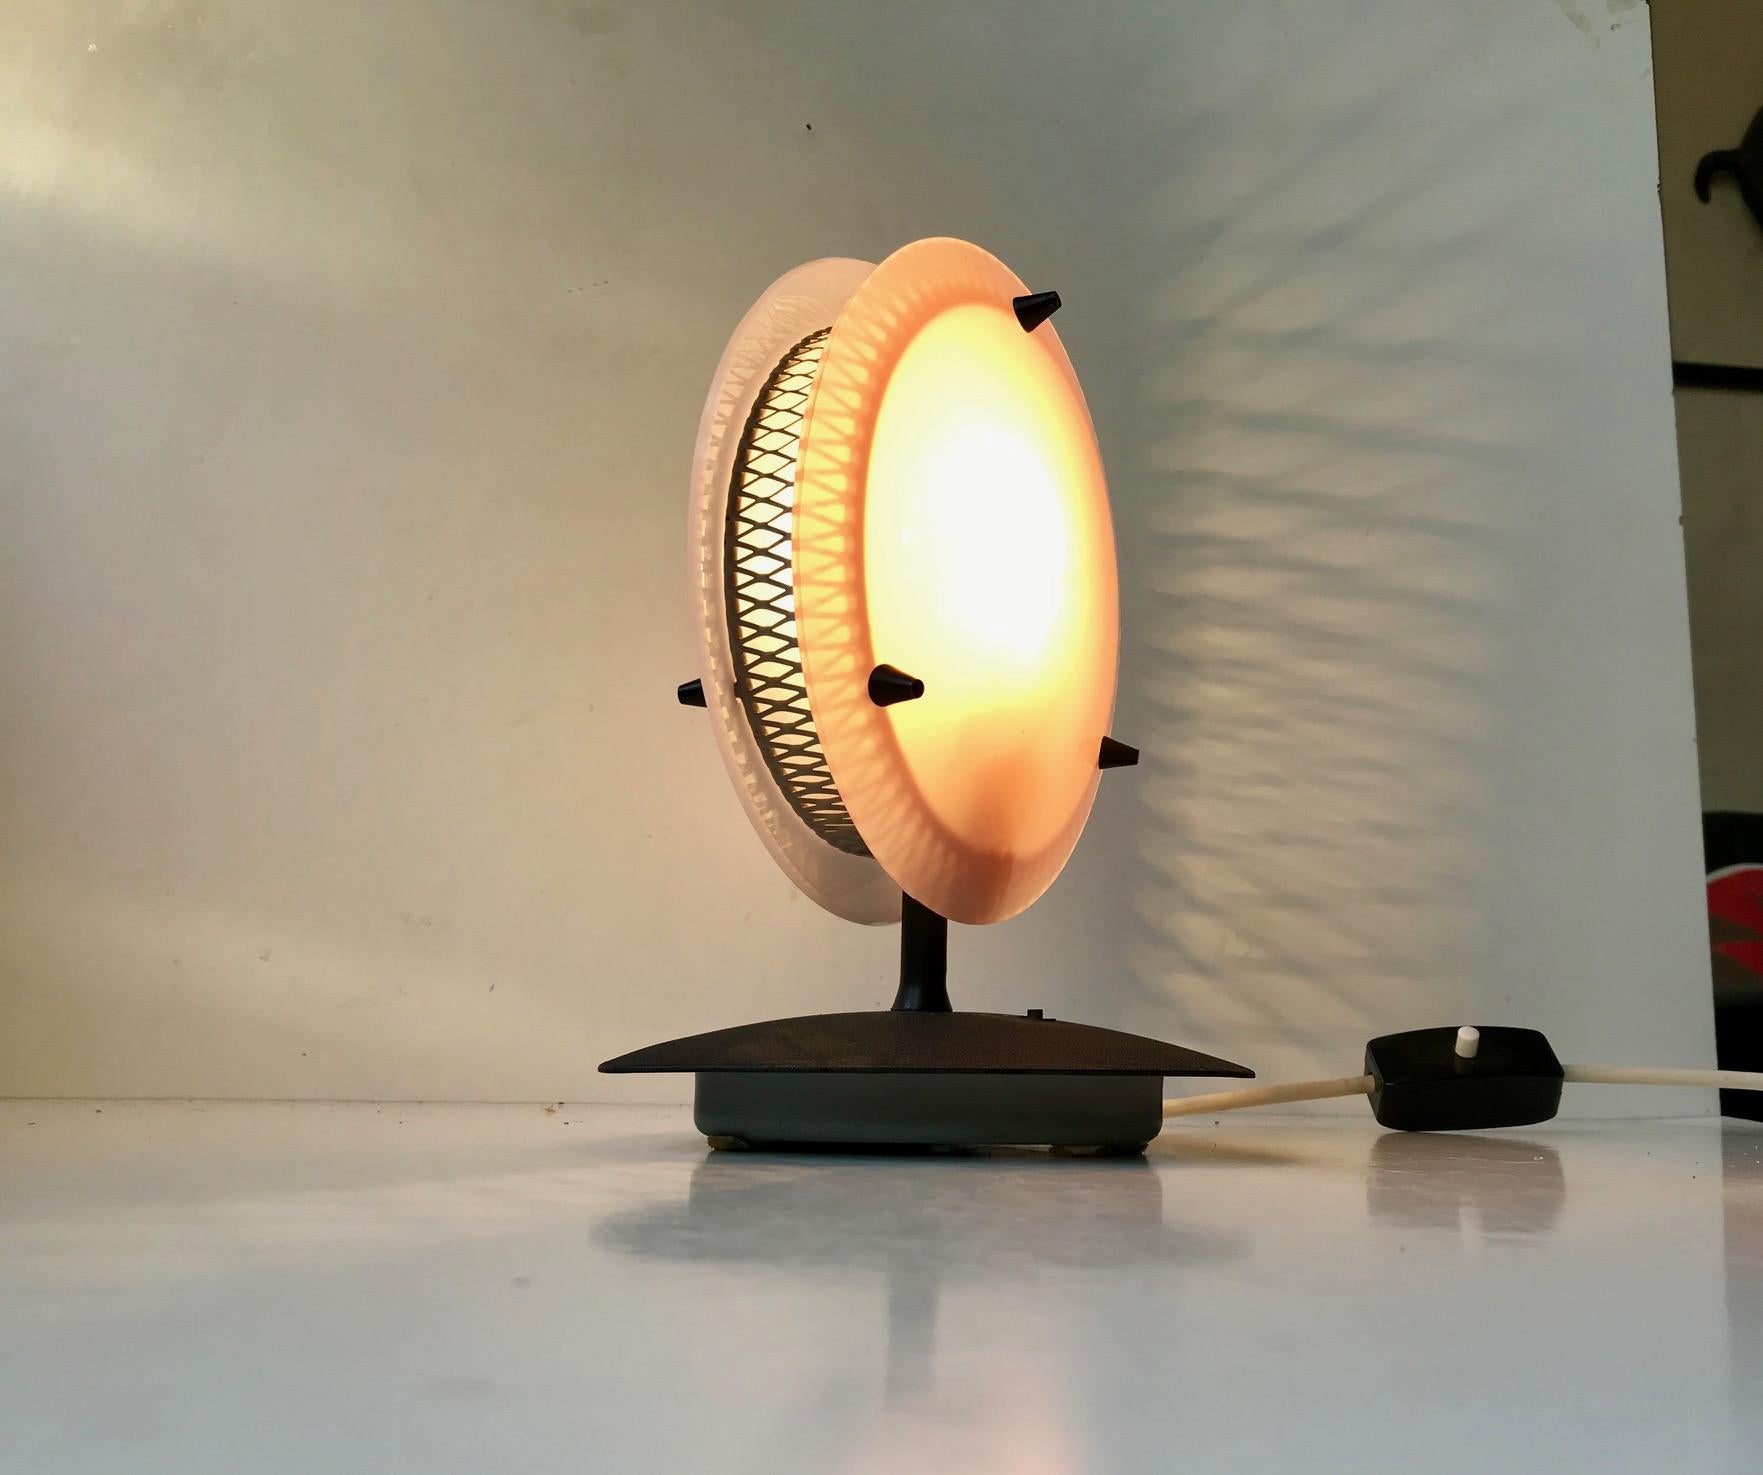 Unusual table light composed of two Lucite shades. One pink and one white separated by patterned metal mesh. The base is made from lacquered metal. Anonymous Italian maker or designer, circa 1960 in the style of Jacques Biny and Pierre Gauriche.